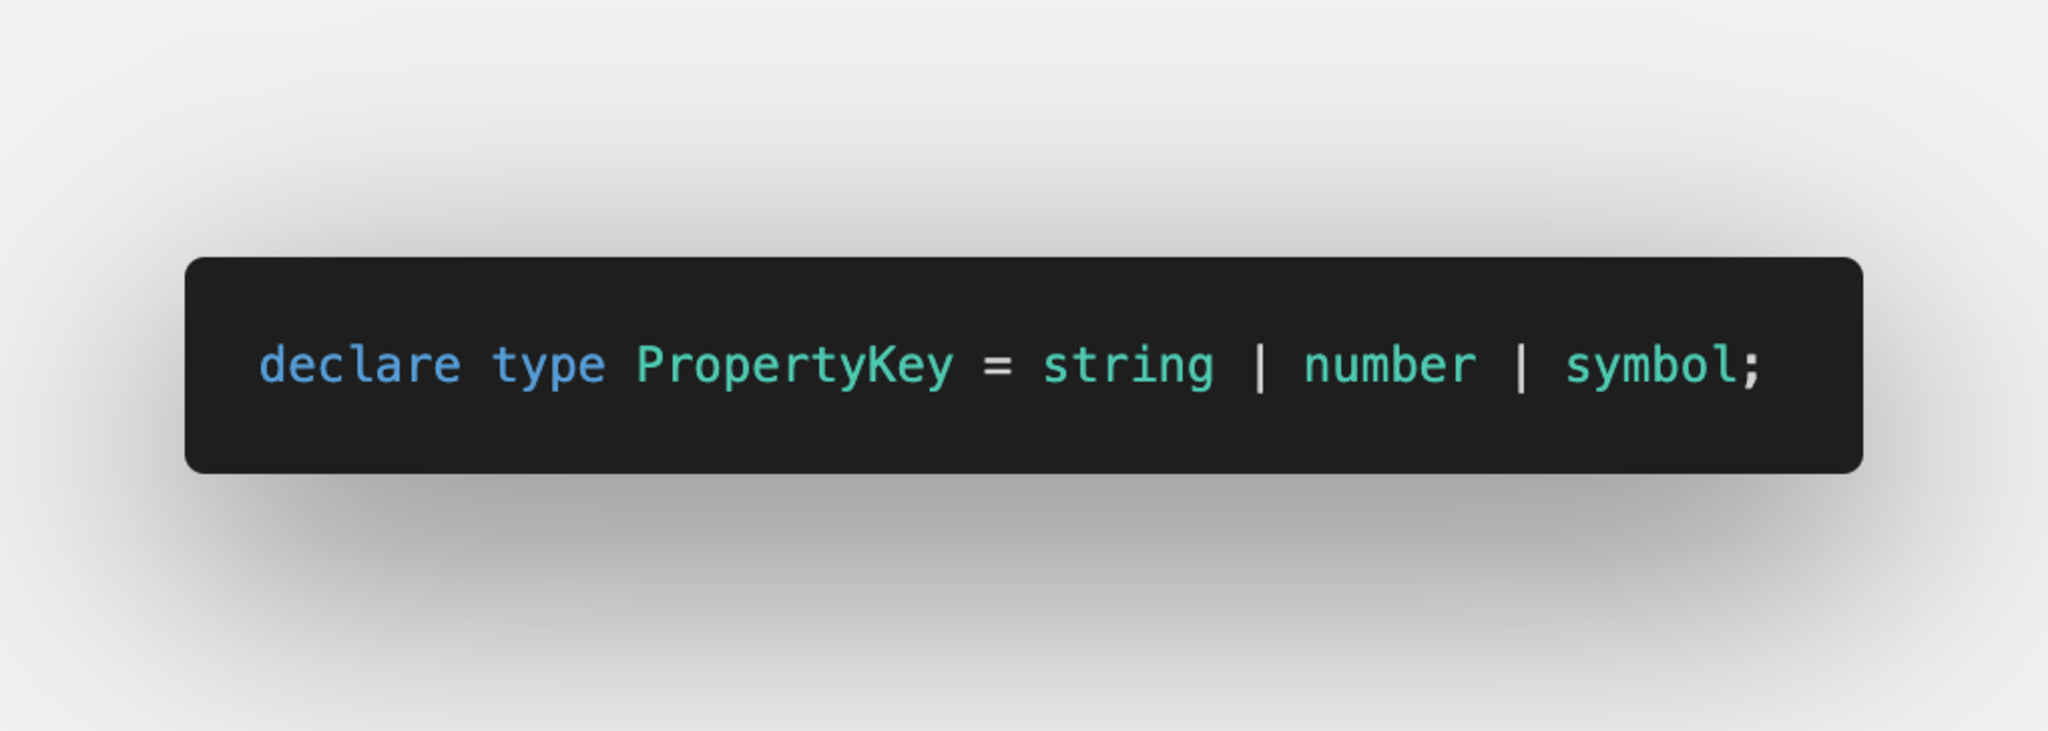 All possible keys for an object type